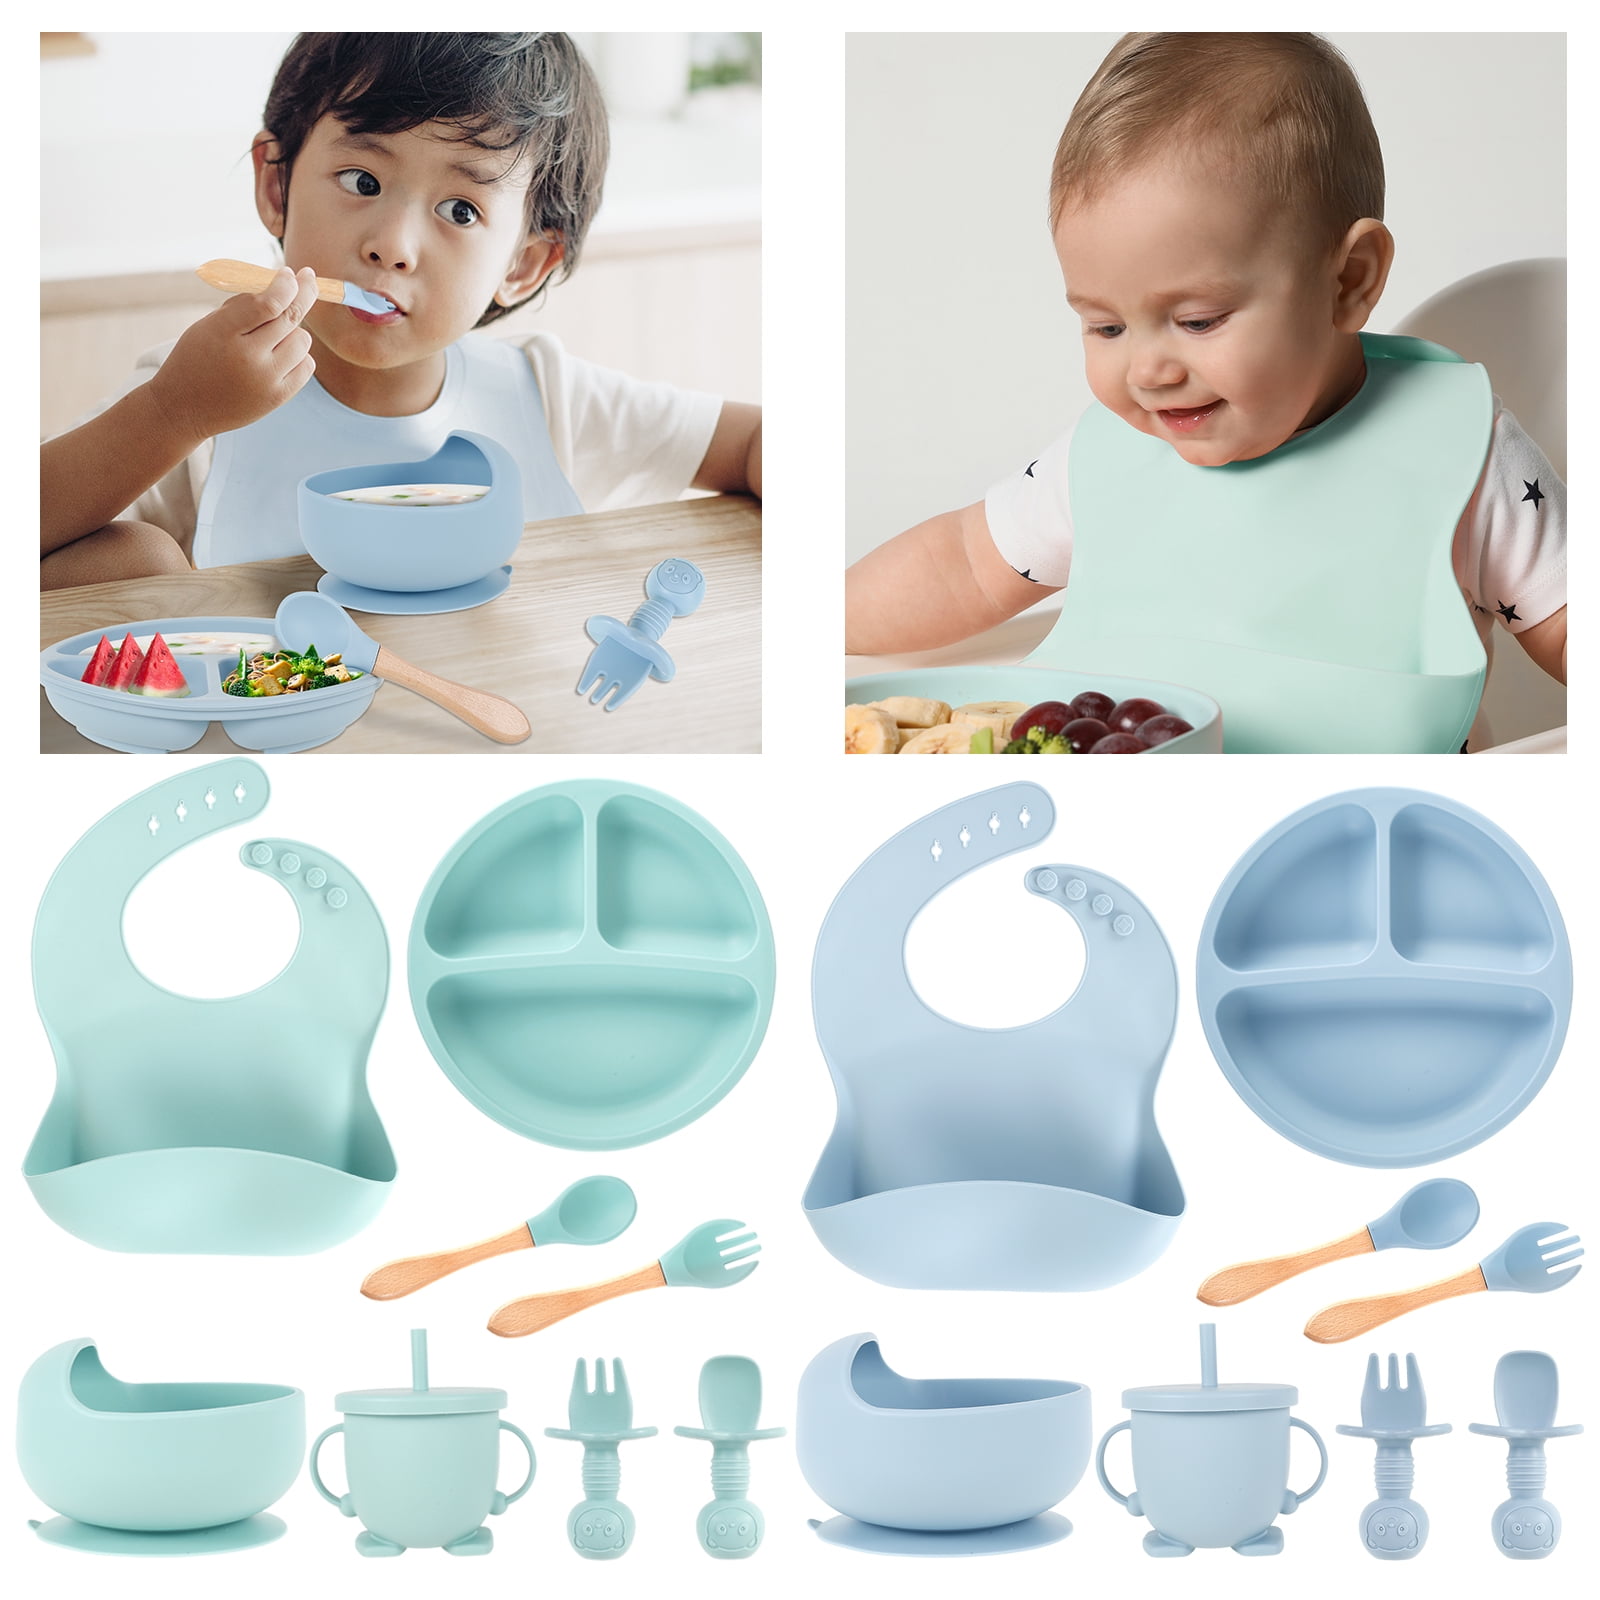 HEQUSIGNS Silicone Baby Feeding Set, 8 Piece Baby Led Weaning Utensils Set  Includes Suction Bowl and Plate, Baby Spoon and Fork, Sippy Cup with Straw, Baby  Feeding Supplies Set 